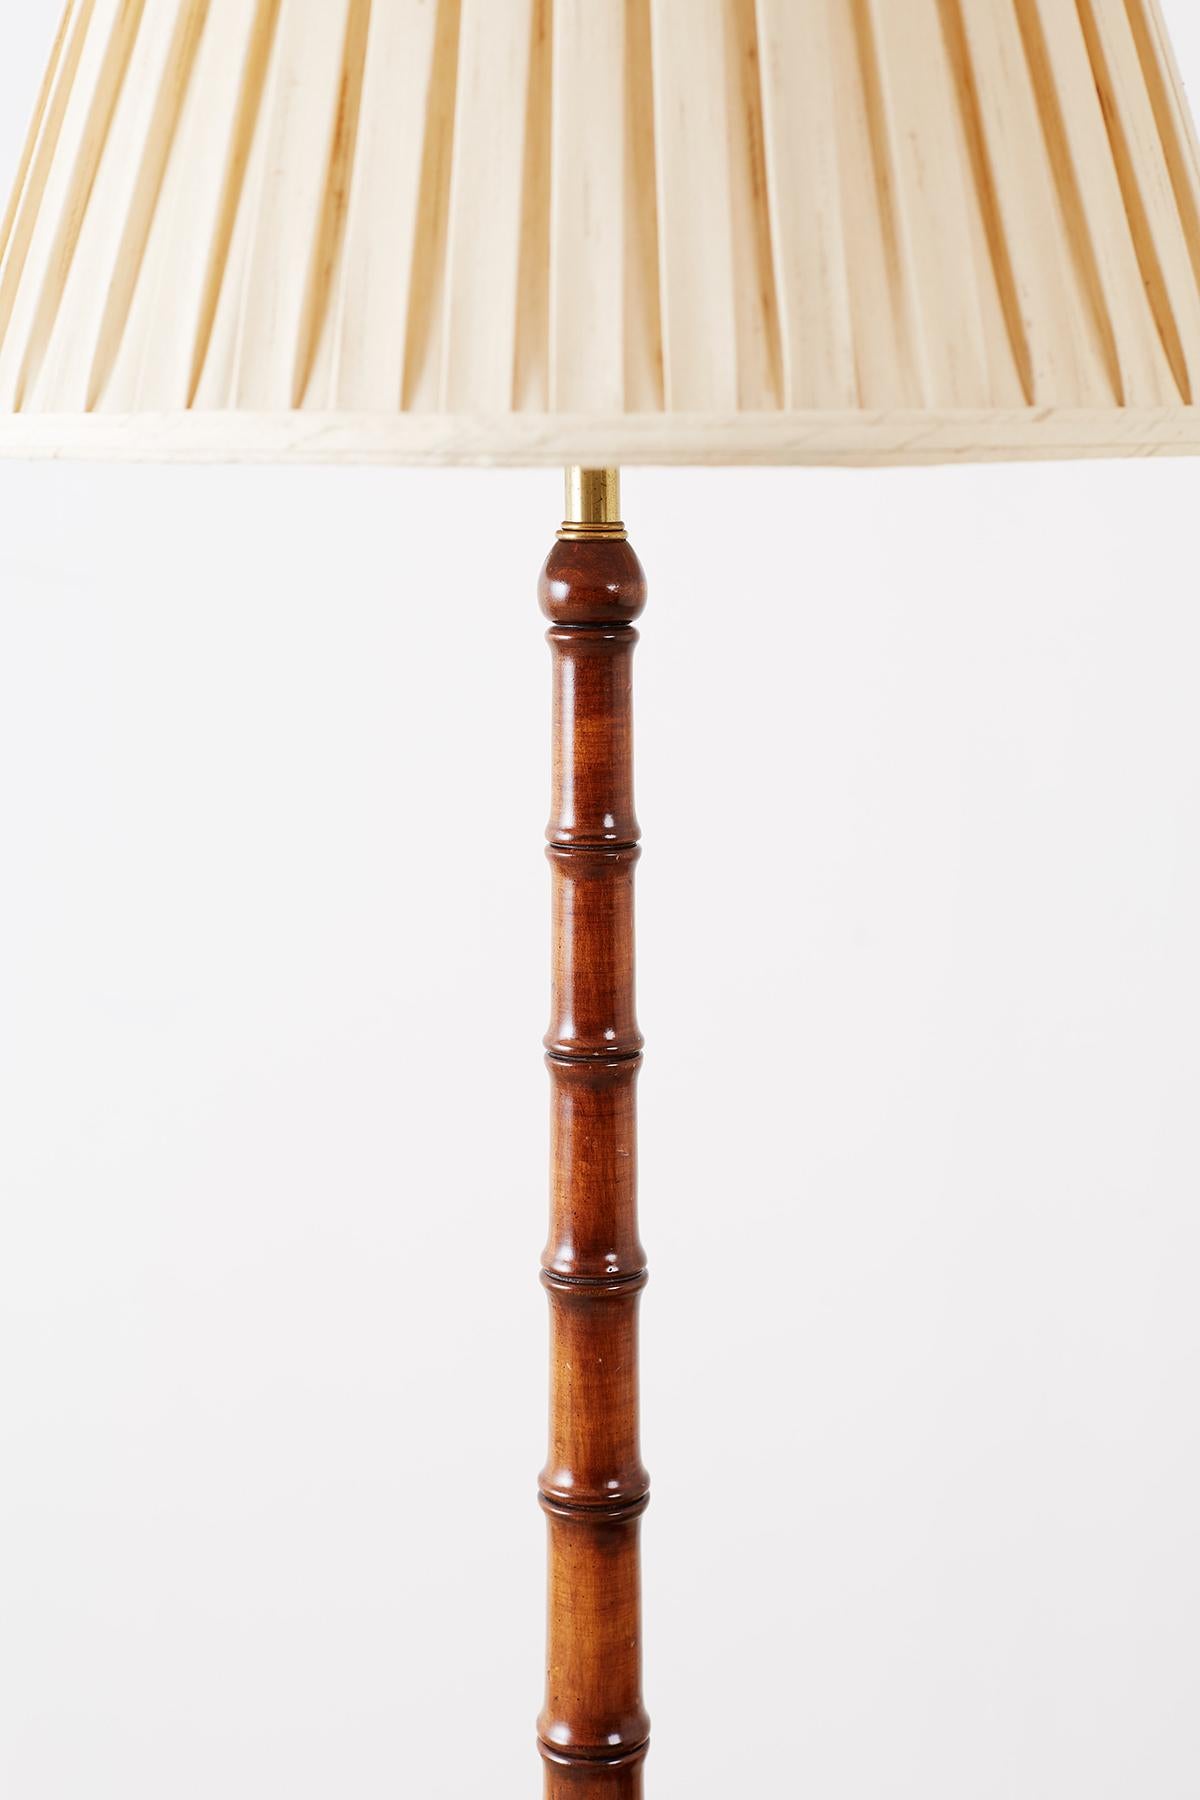 Regency Faux Bamboo Library Step Display Lamp Table